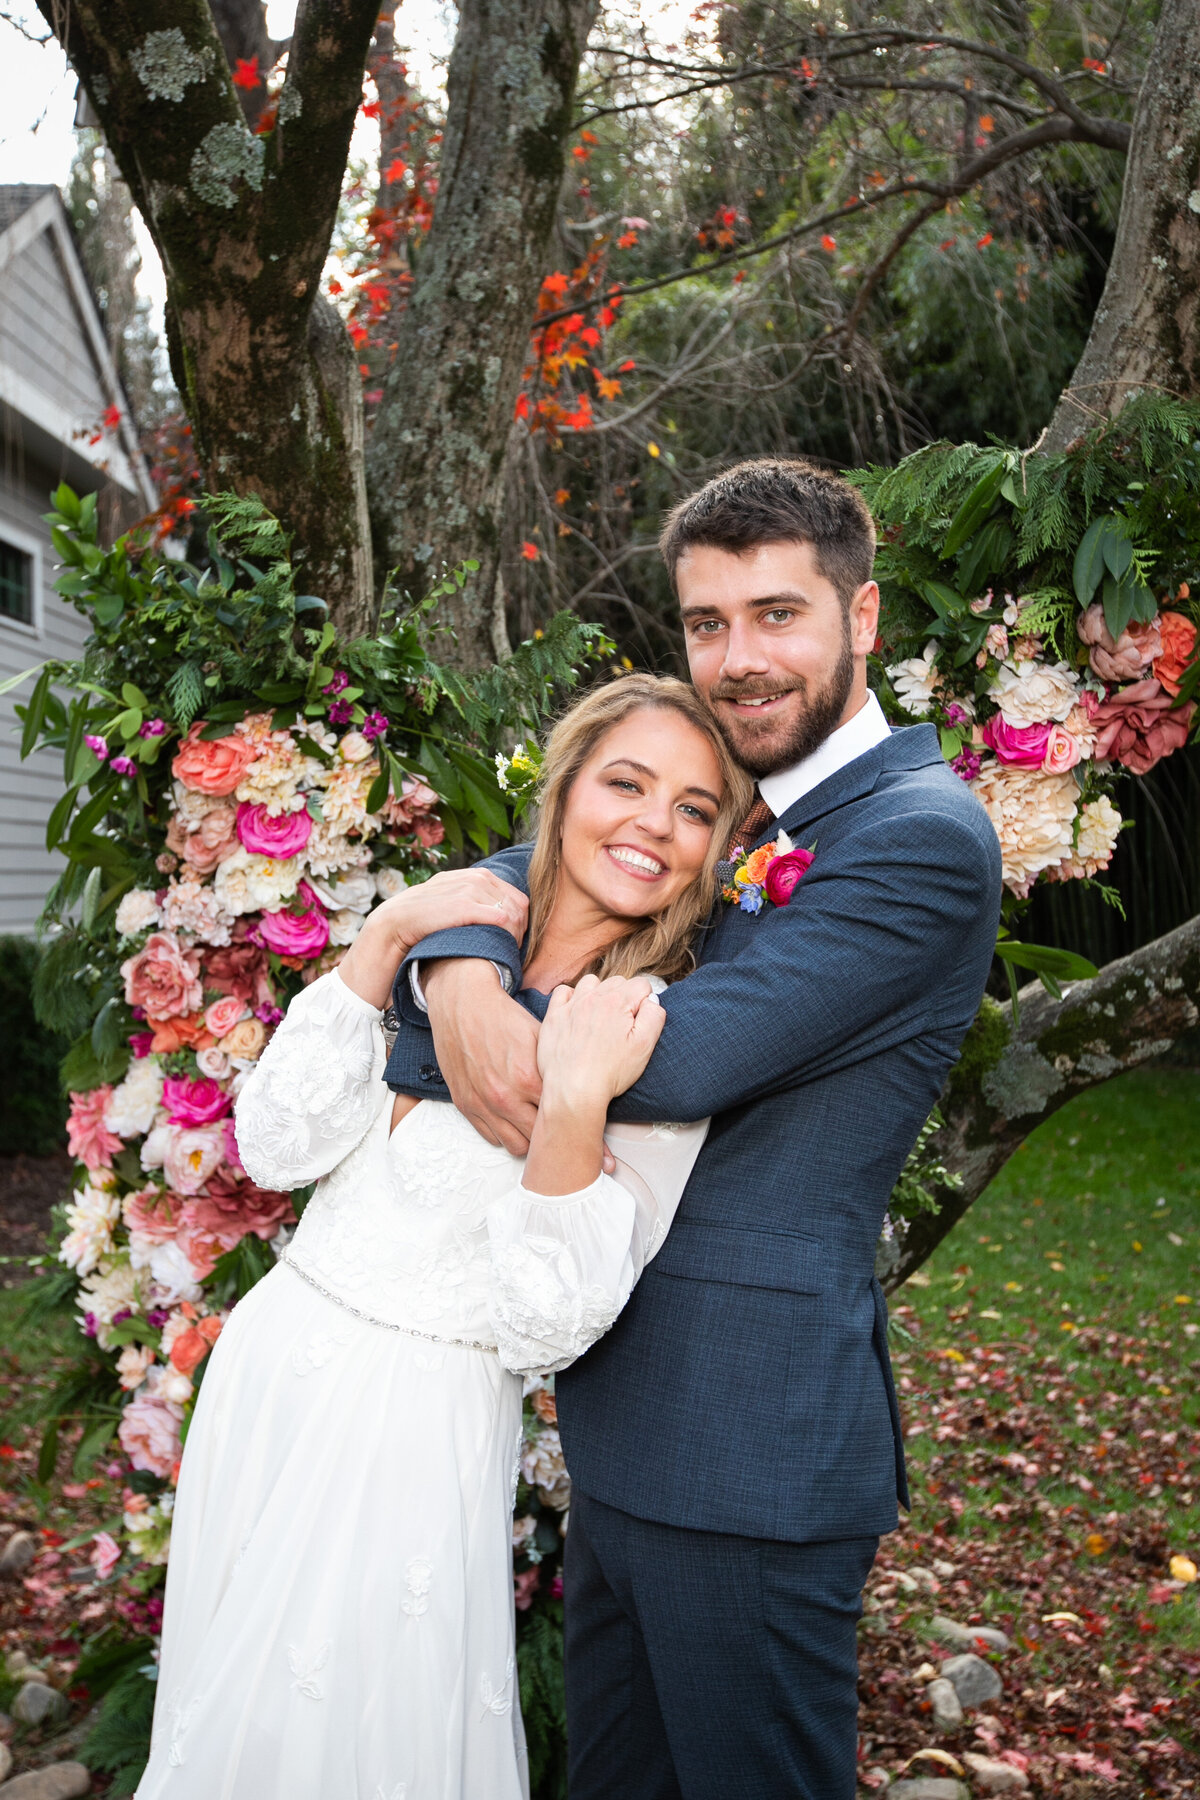 A bride and groom embrace in front of a tree covered in bright flowers